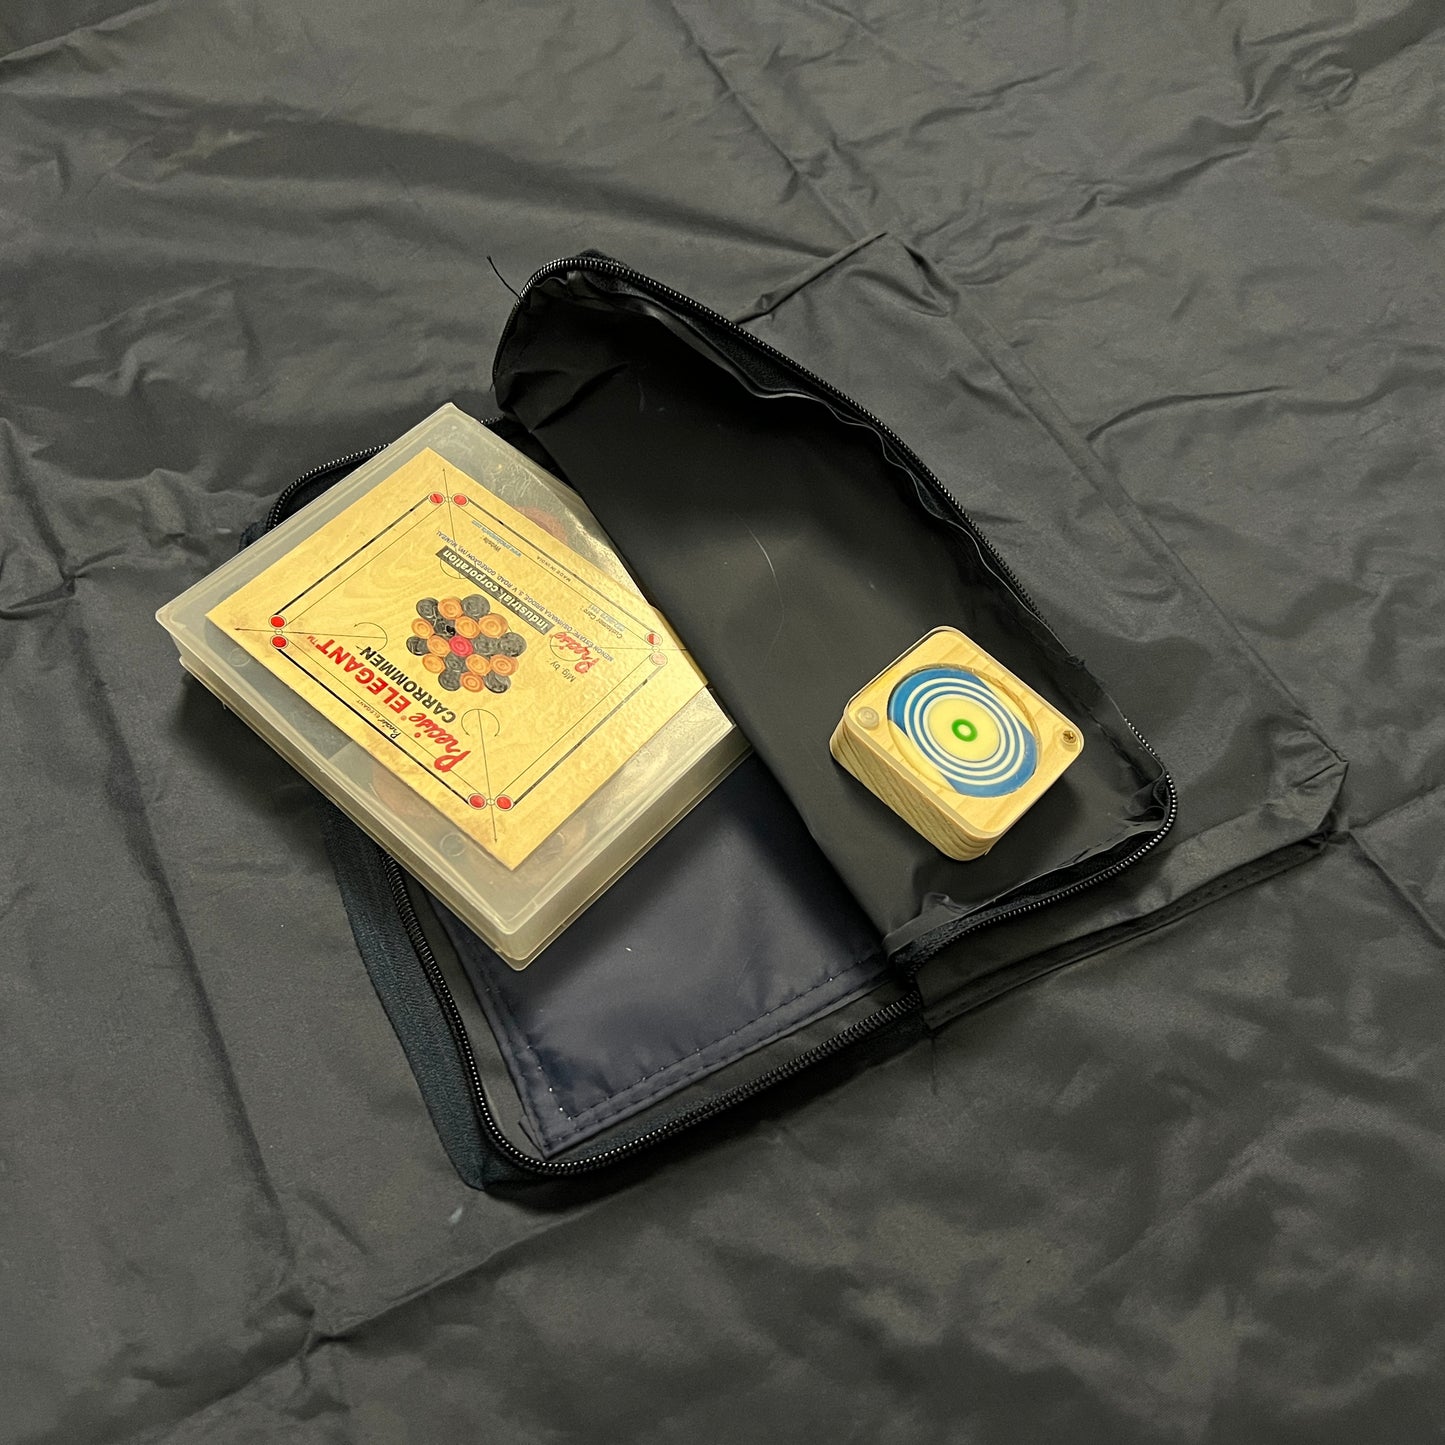 Heavy quality rexine protective cover for 32x32 inch carrom boards, featuring a pocket for storing accessories, ensuring the playing surface is protected when not in use.